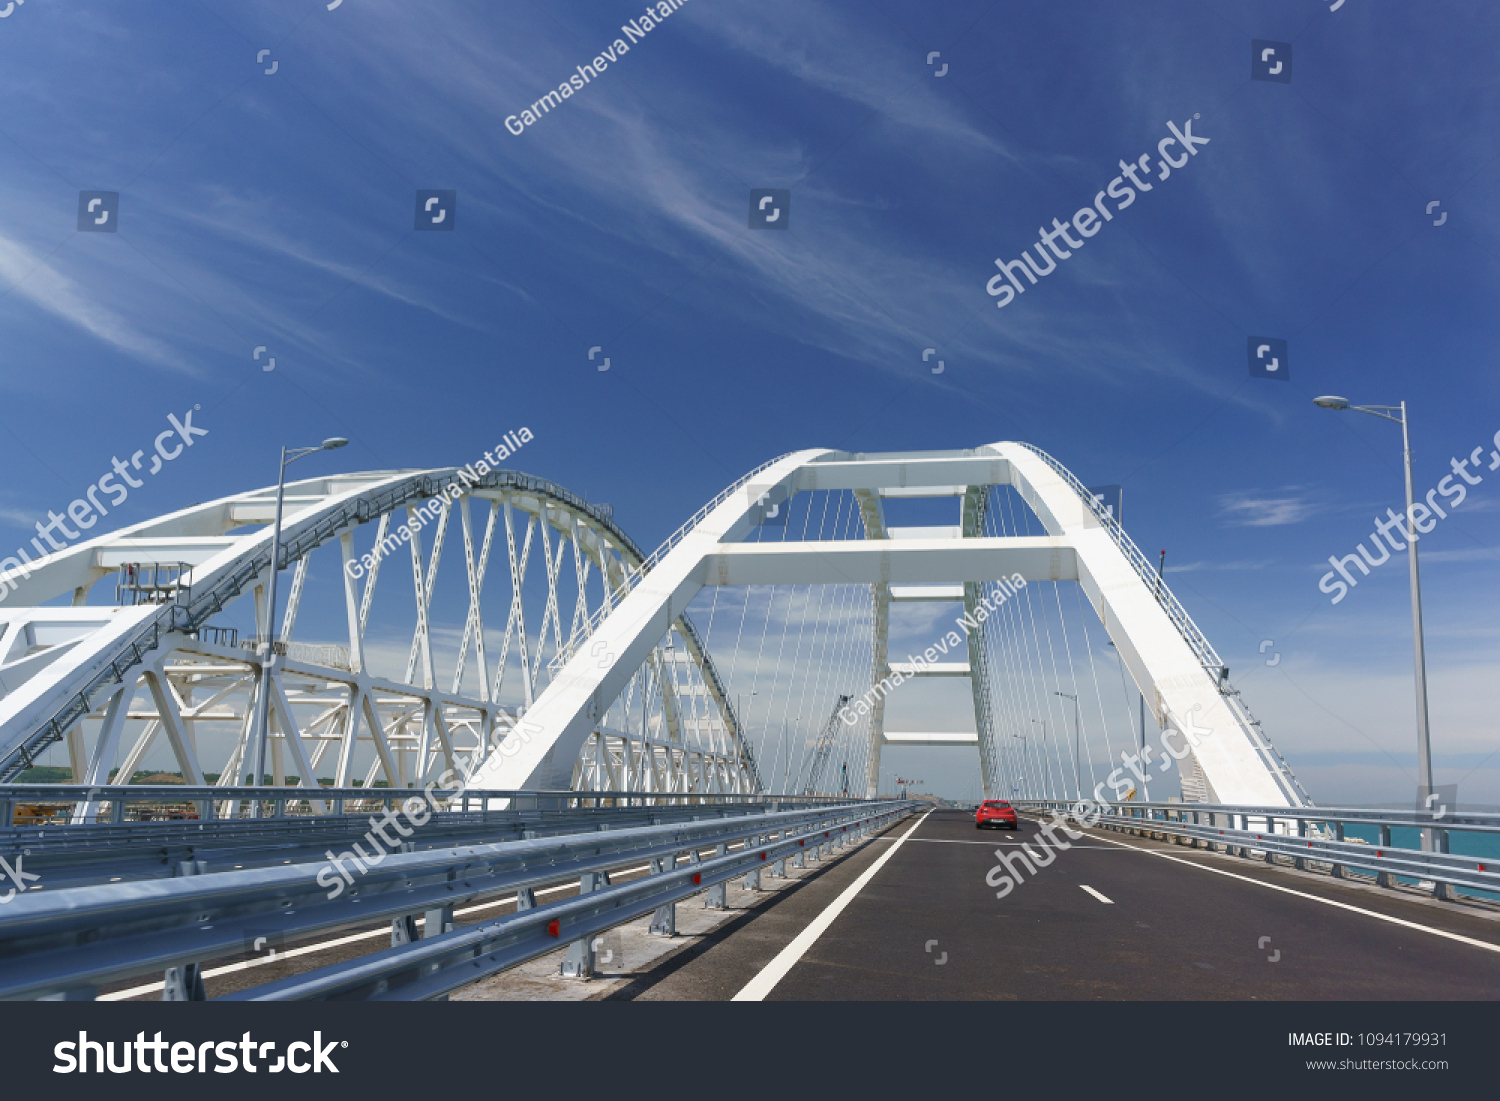 Cars go on the Crimean automobile bridge connecting the banks of the Kerch Strait: Taman and Kerch, Crimea. Russia #1094179931